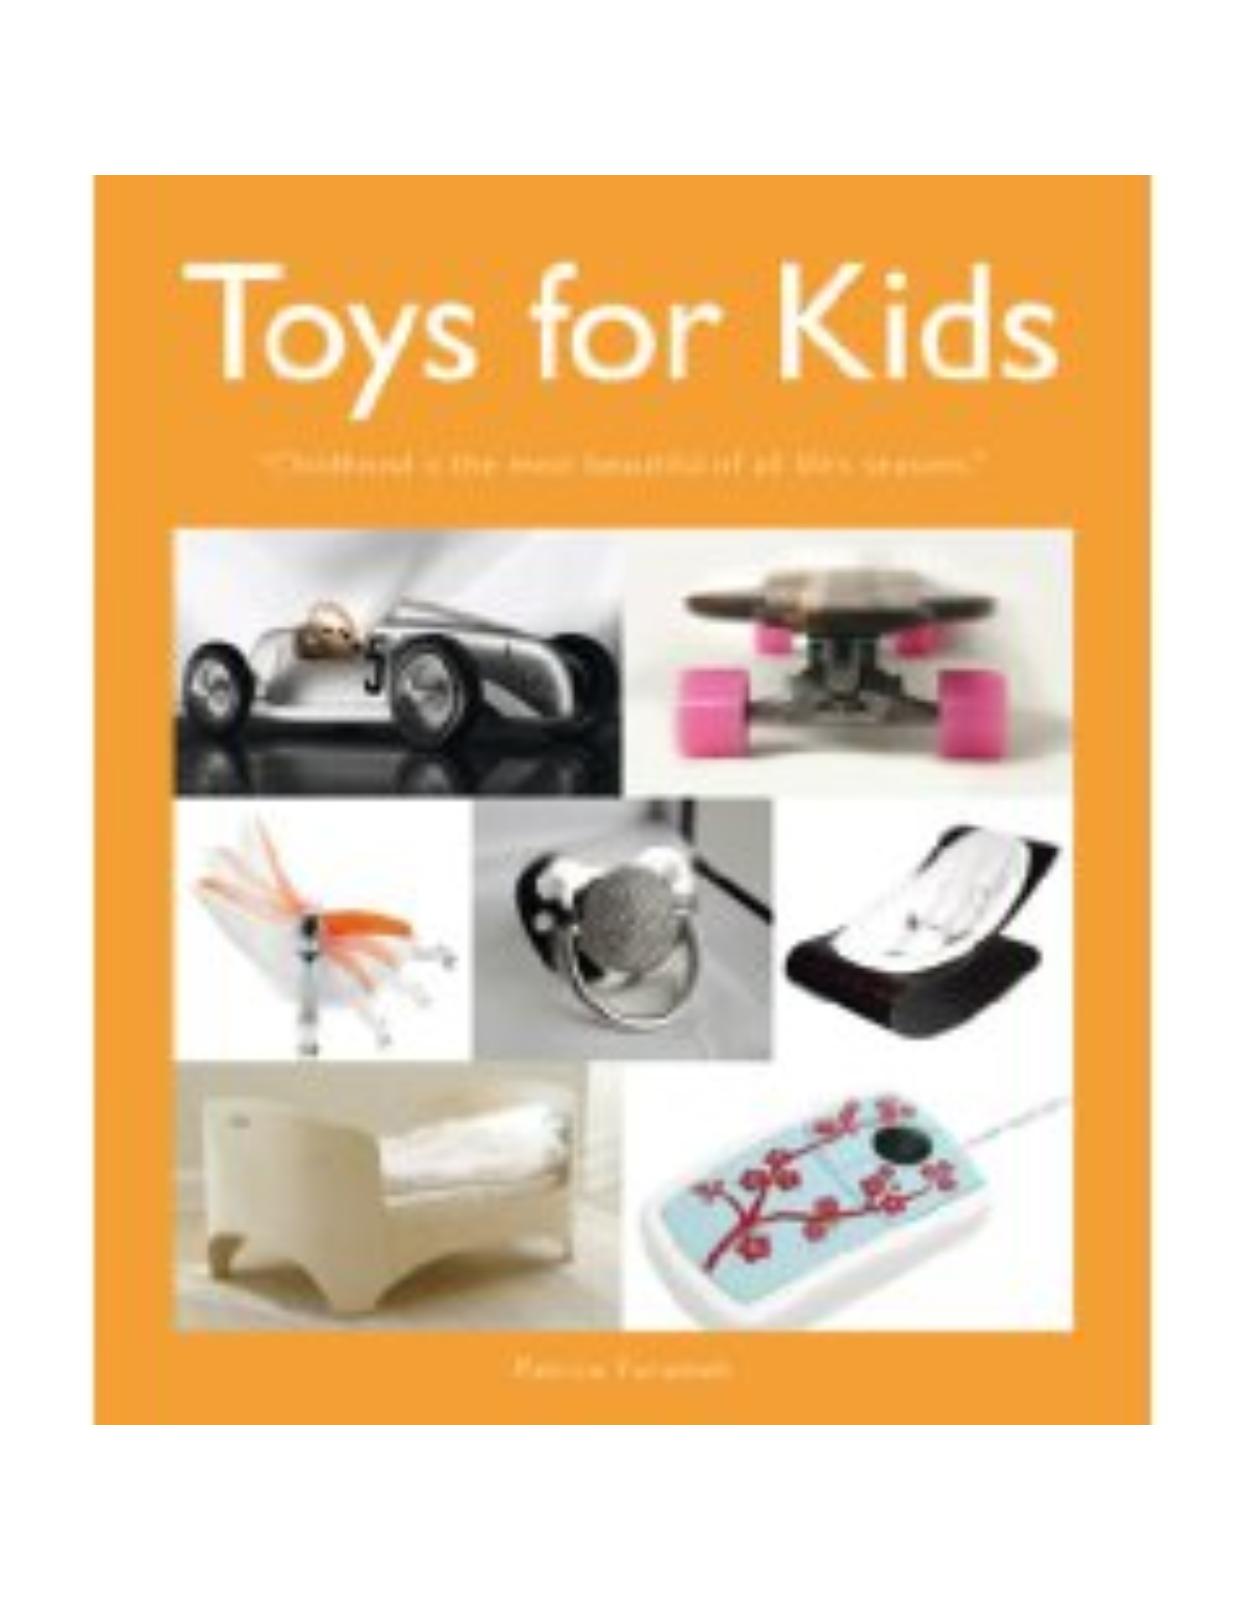 Toys for Kids: Childhood Is the Most Beautiful of All Life's Seasons